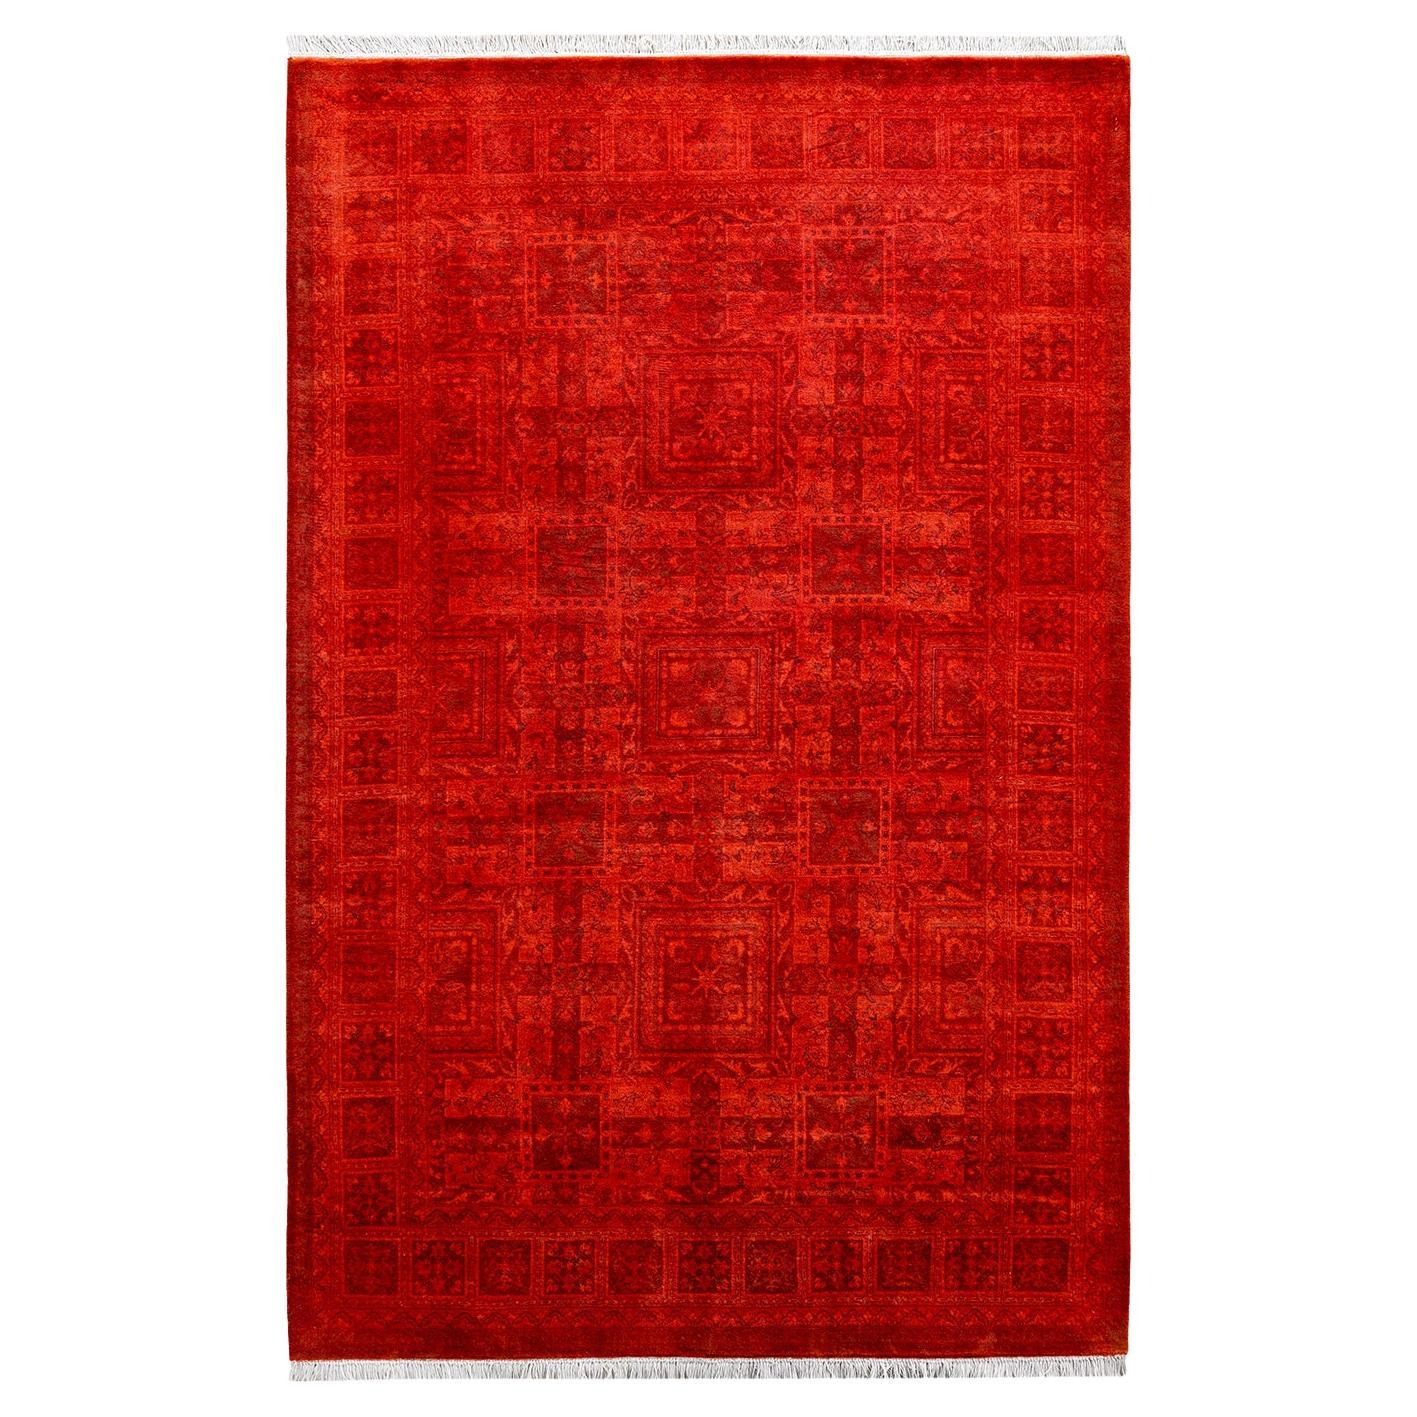 Contemporary Fine Vibrance Hand Knotted Wool Orange Area Rug 